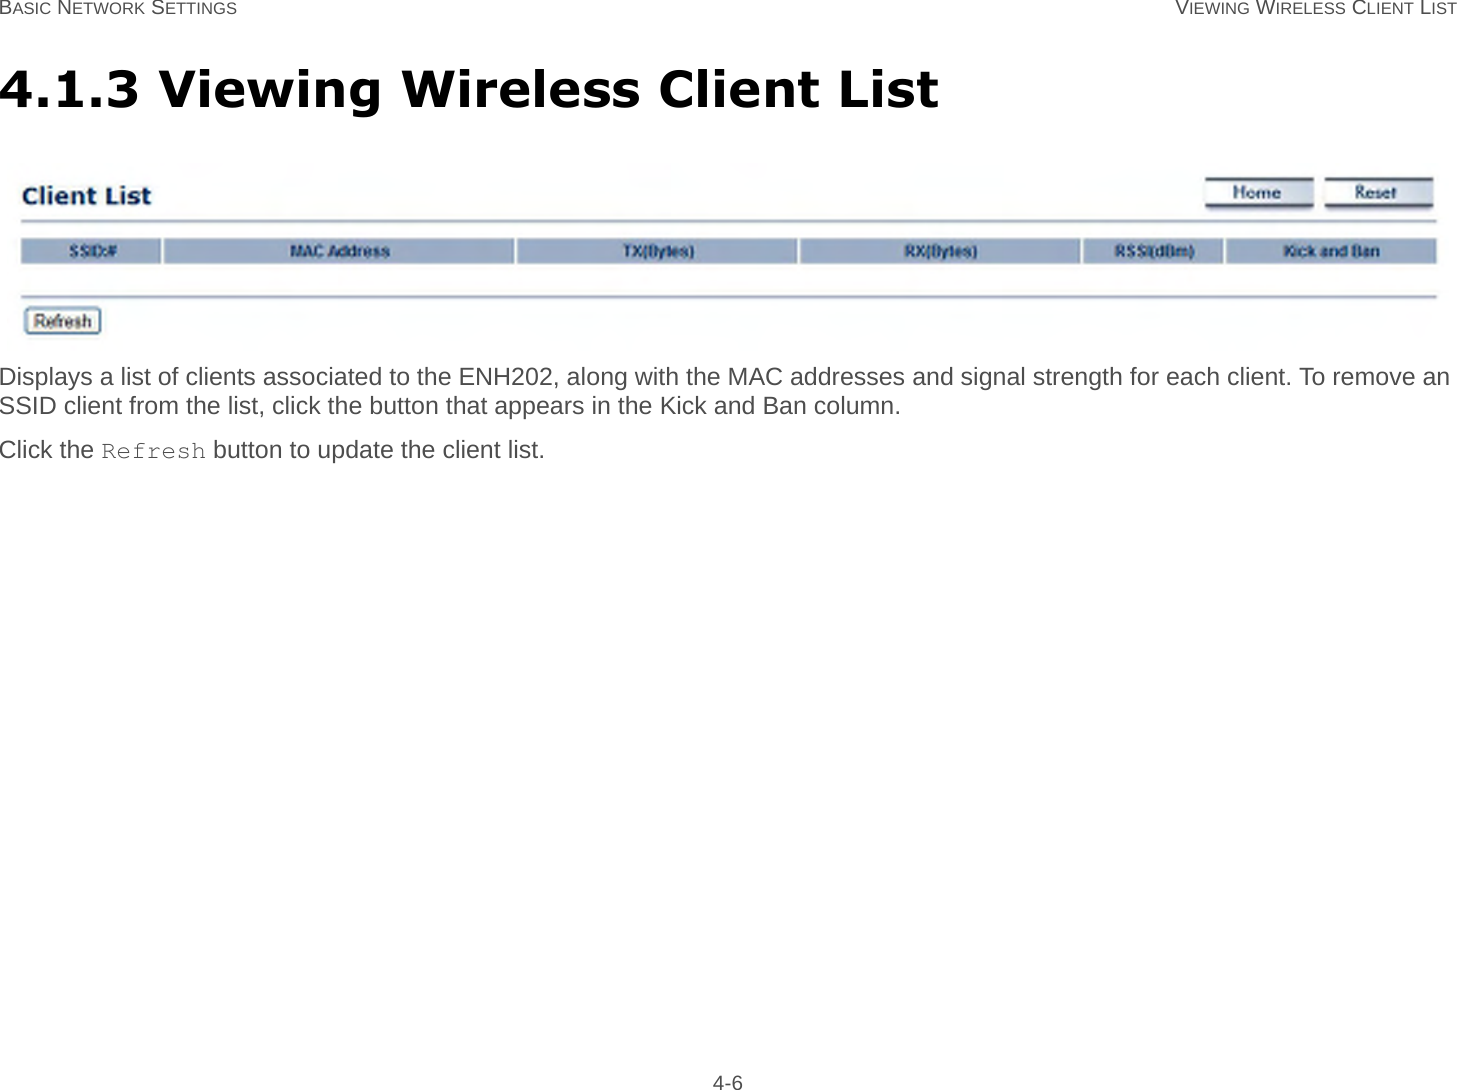 BASIC NETWORK SETTINGS VIEWING WIRELESS CLIENT LIST 4-64.1.3 Viewing Wireless Client ListDisplays a list of clients associated to the ENH202, along with the MAC addresses and signal strength for each client. To remove an SSID client from the list, click the button that appears in the Kick and Ban column.Click the Refresh button to update the client list.